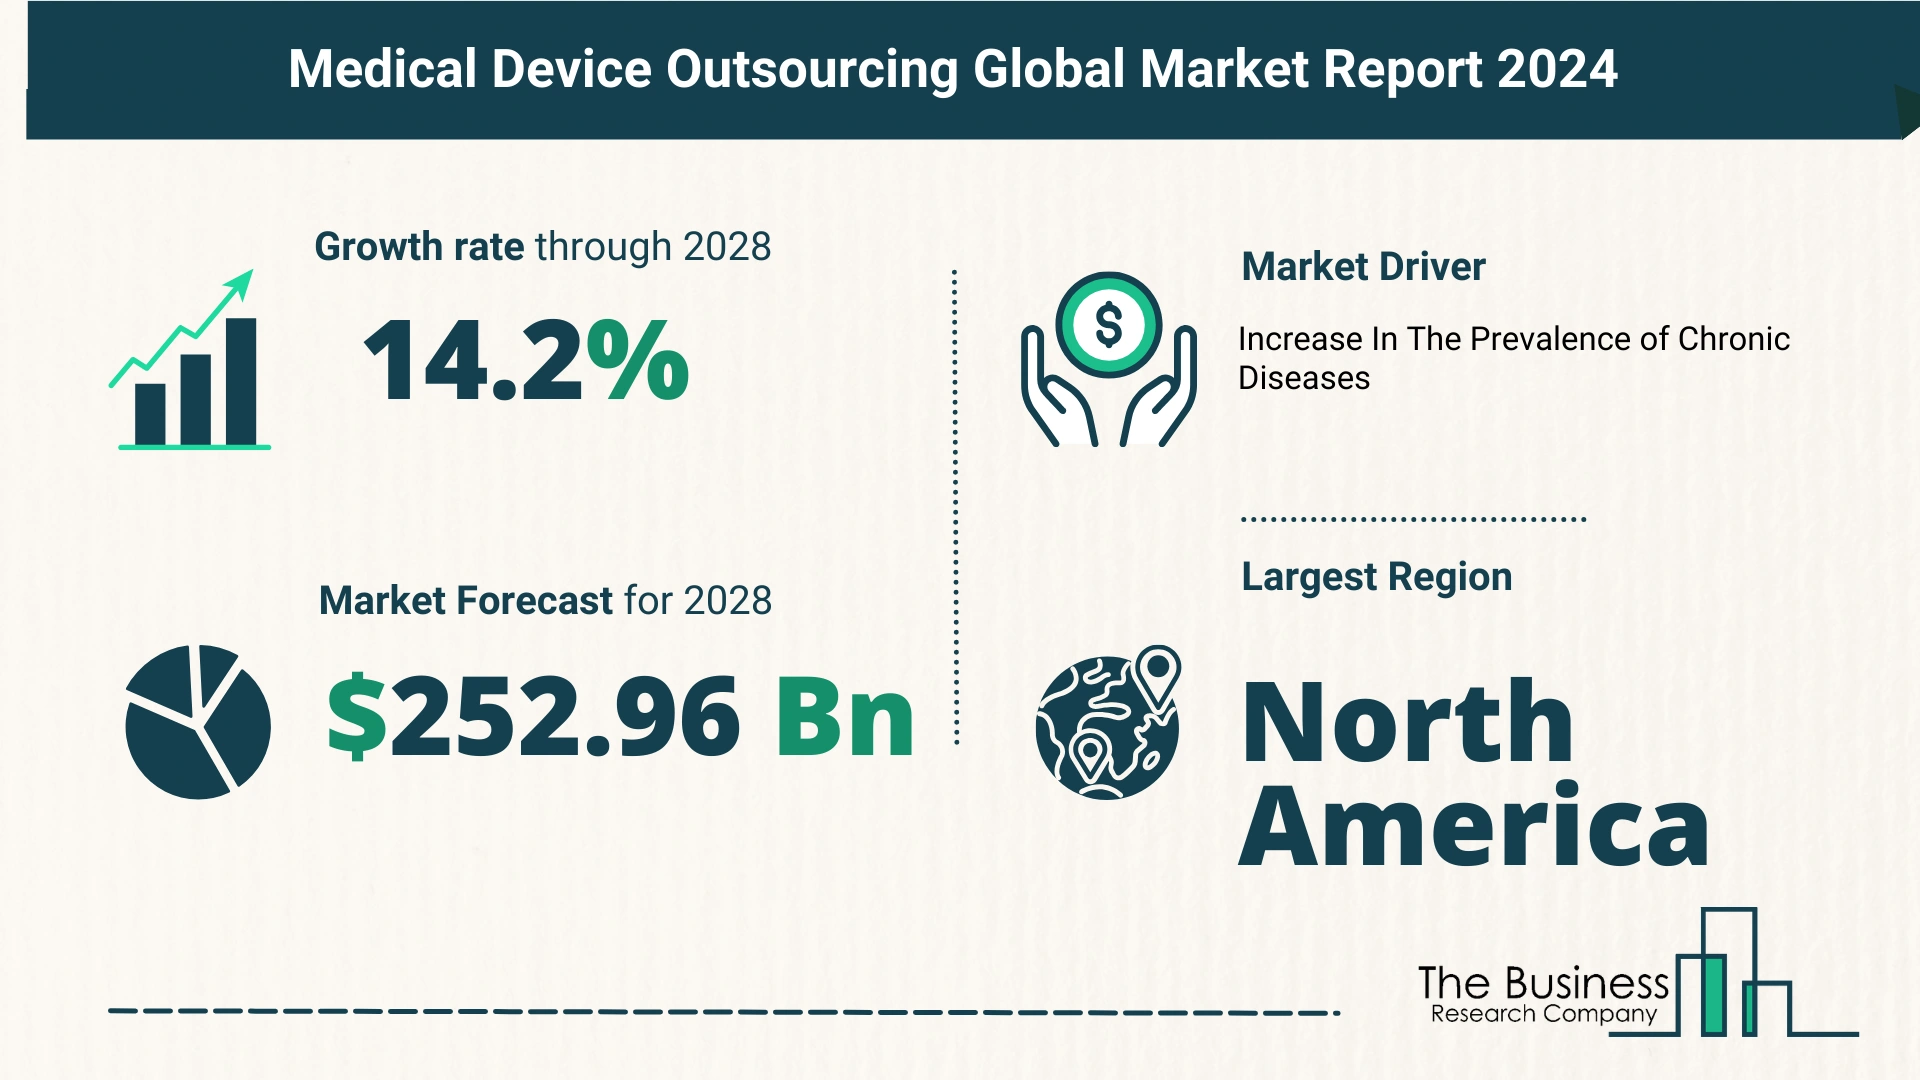 Key Trends And Drivers In The Medical Device Outsourcing Market 2024